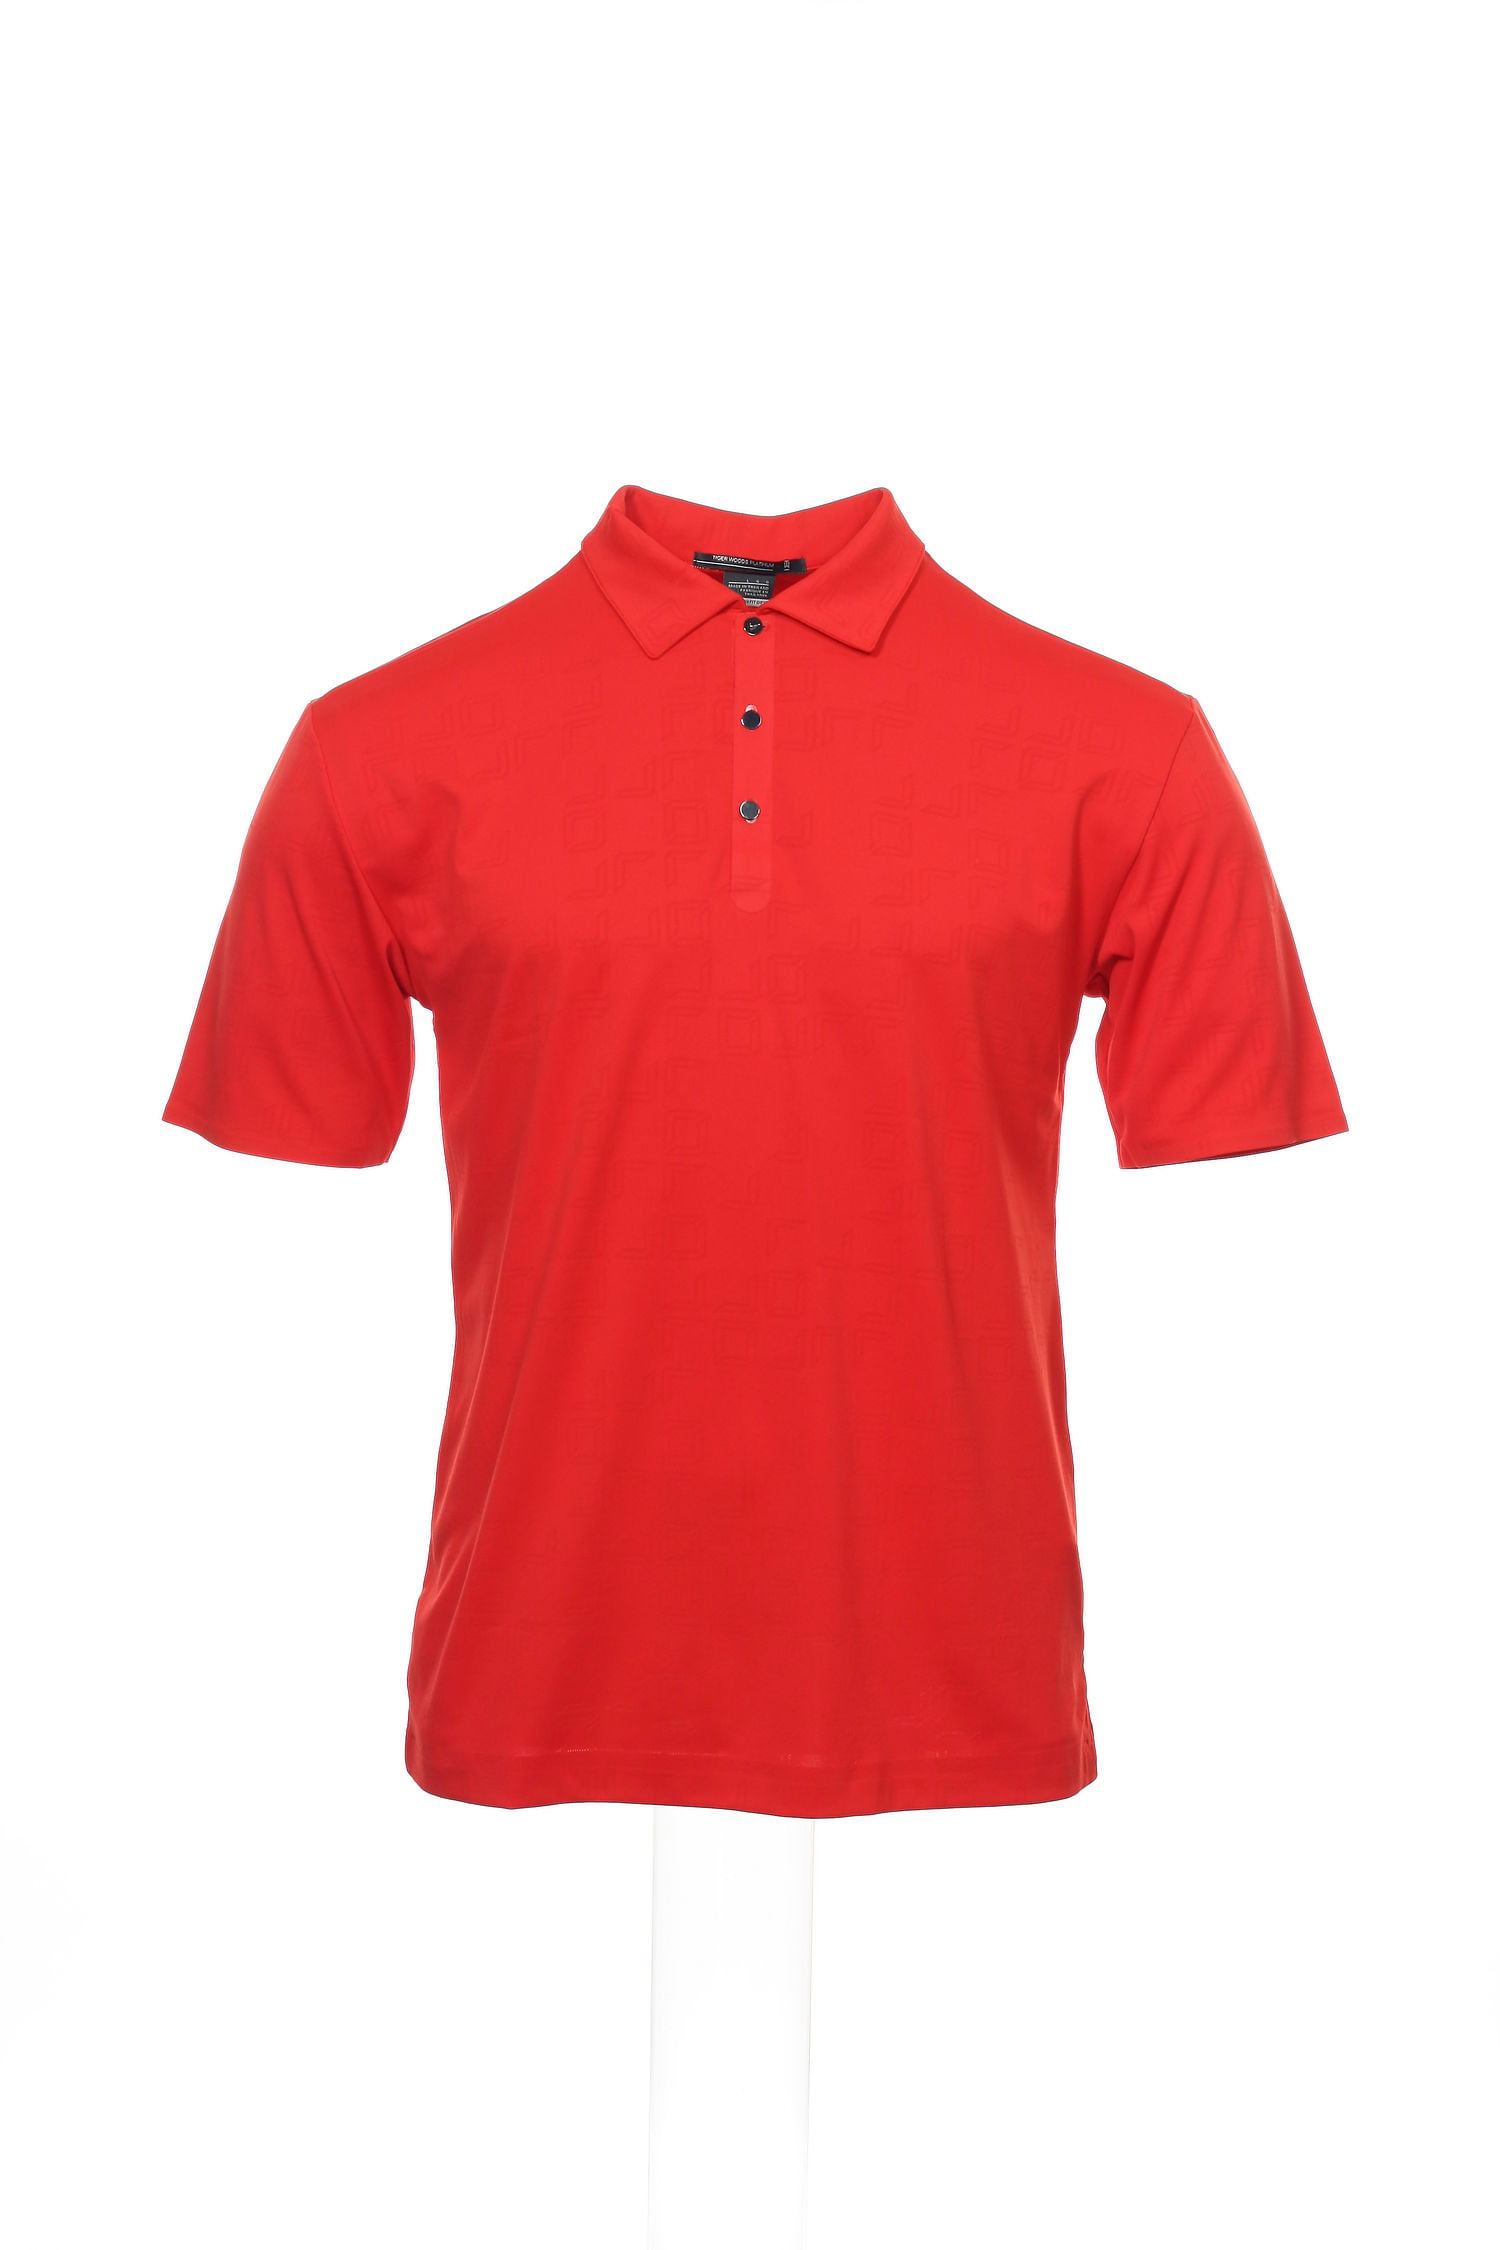 tiger woods red nike polo